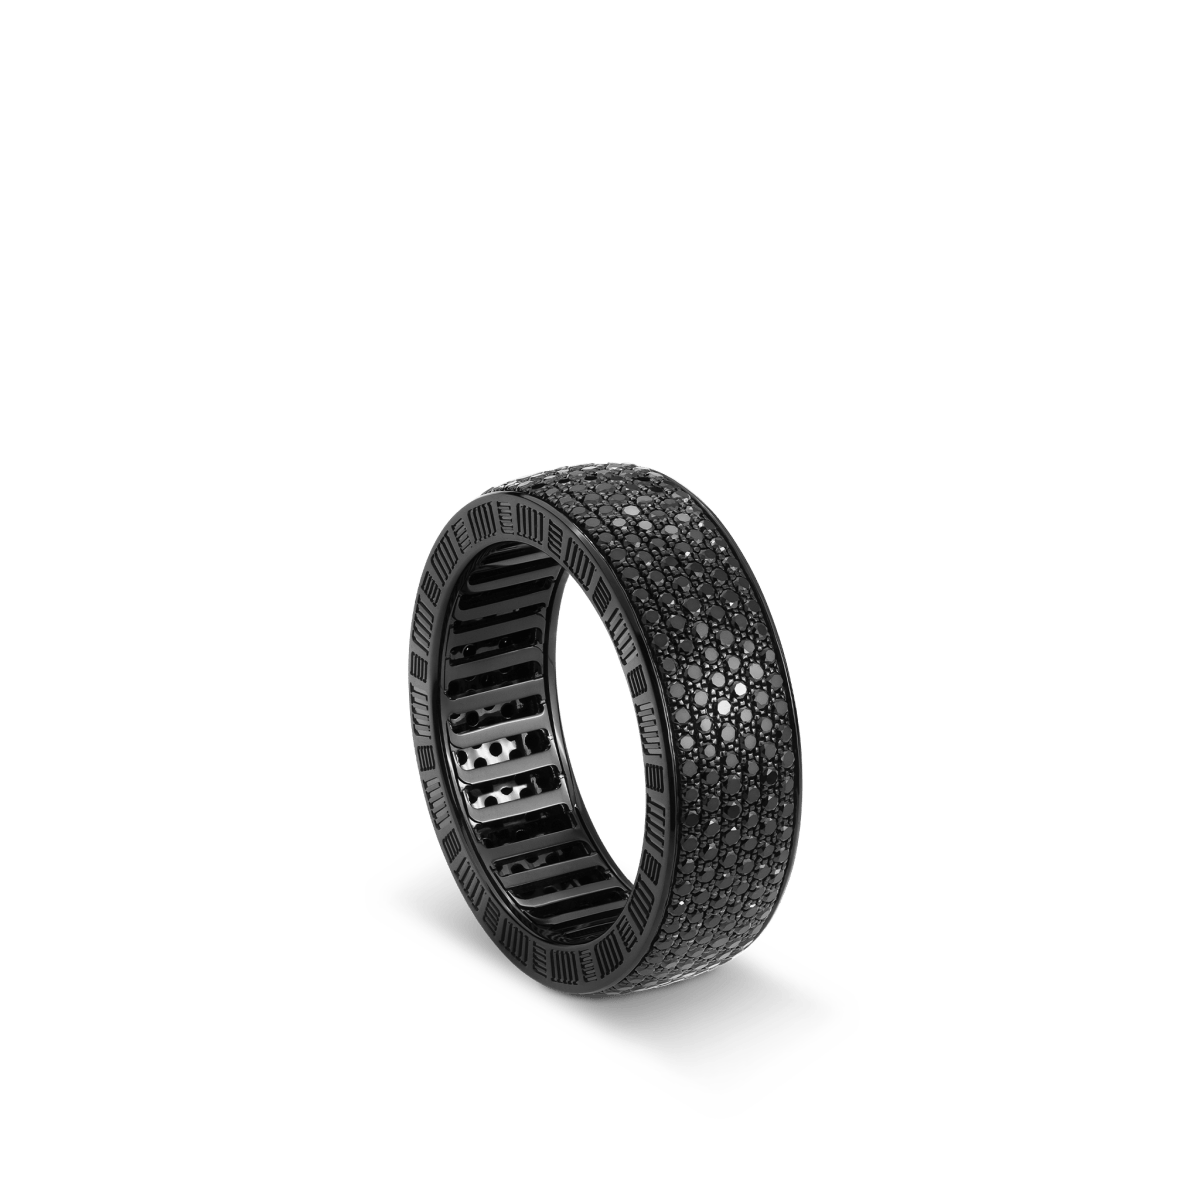 DNA Cage Ring XL